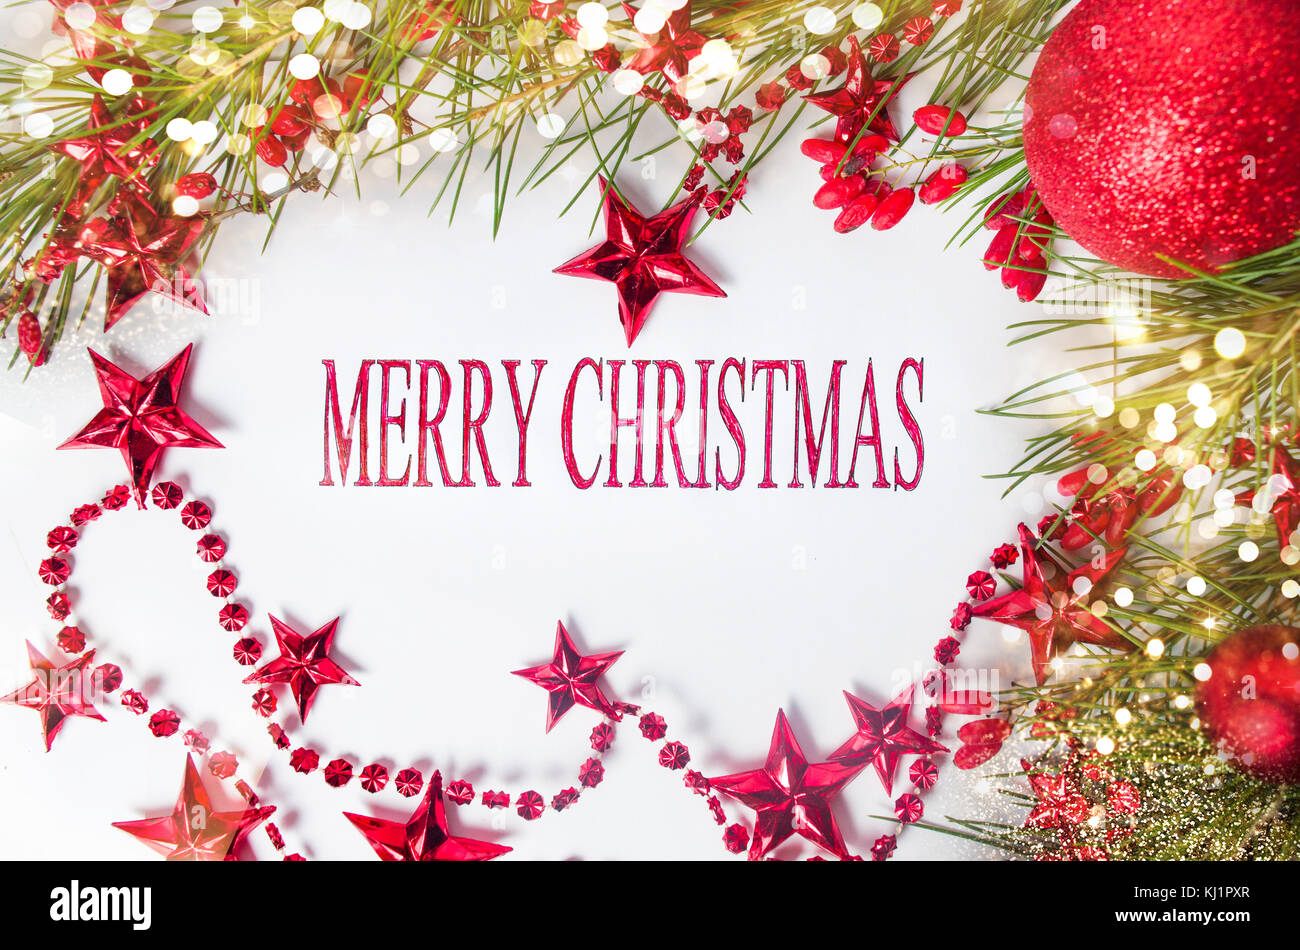 Merry Christmas card with red decorations and fir tree Stock Photo